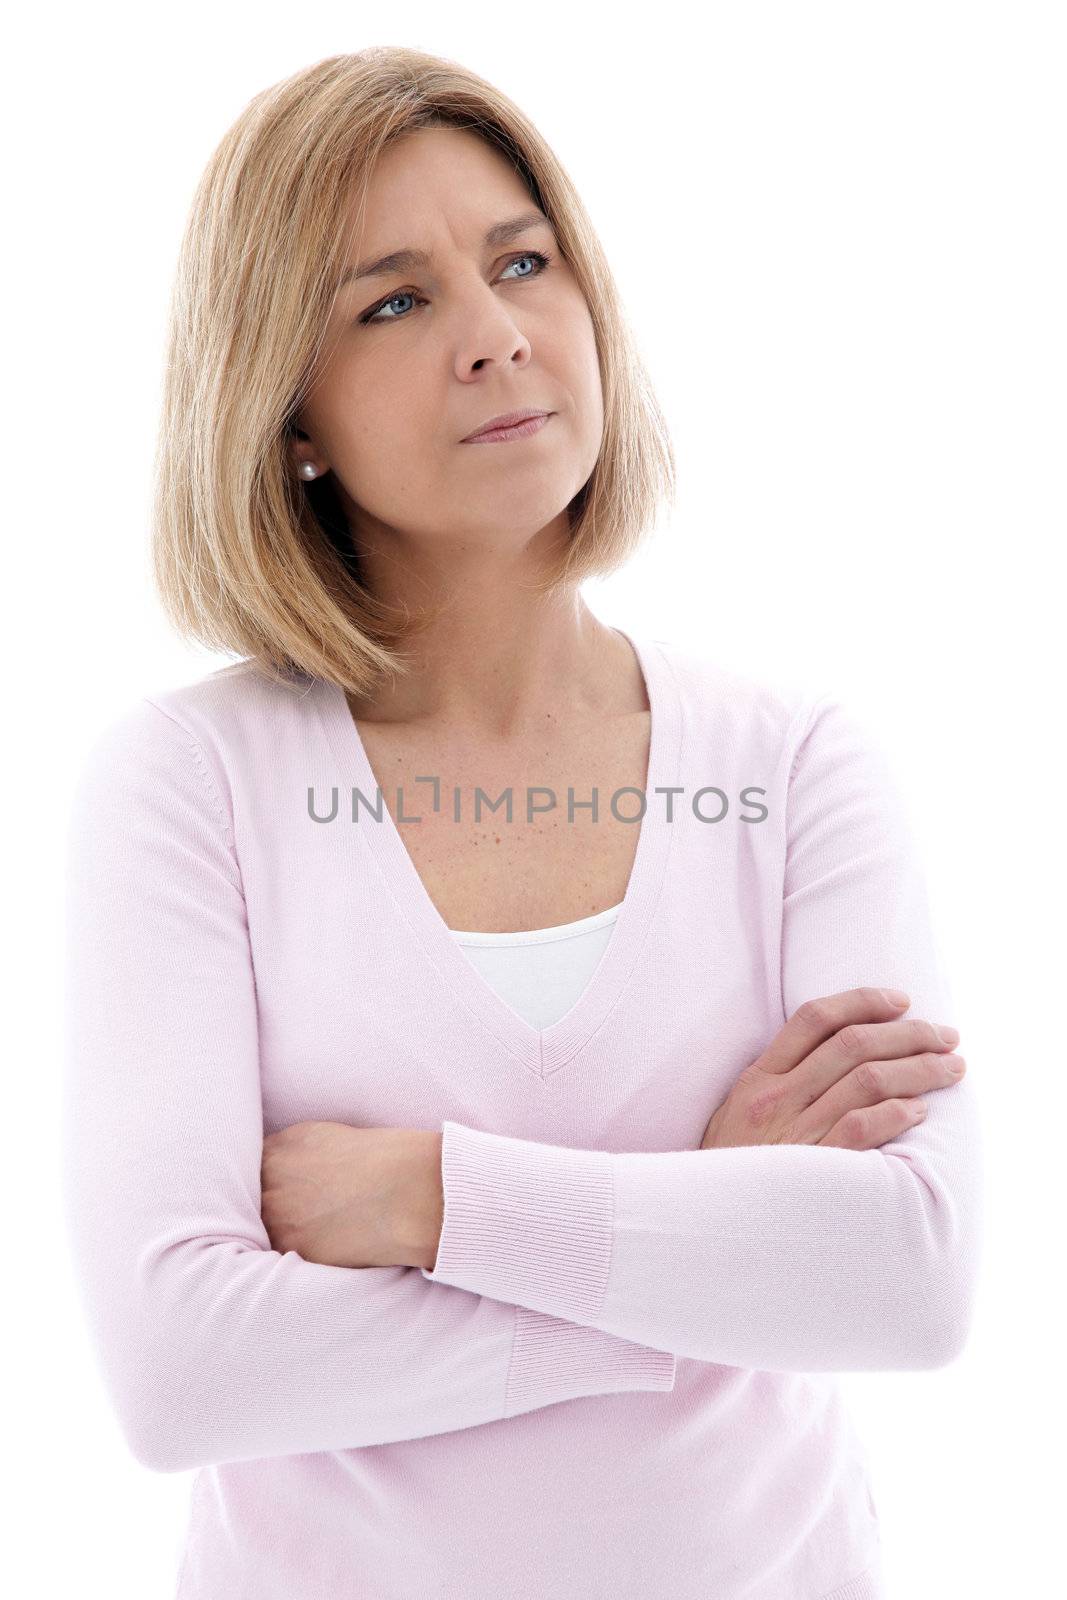 Pensive middle aged blond woman standing with folded arms staring up into the air with a frown, isolated on white